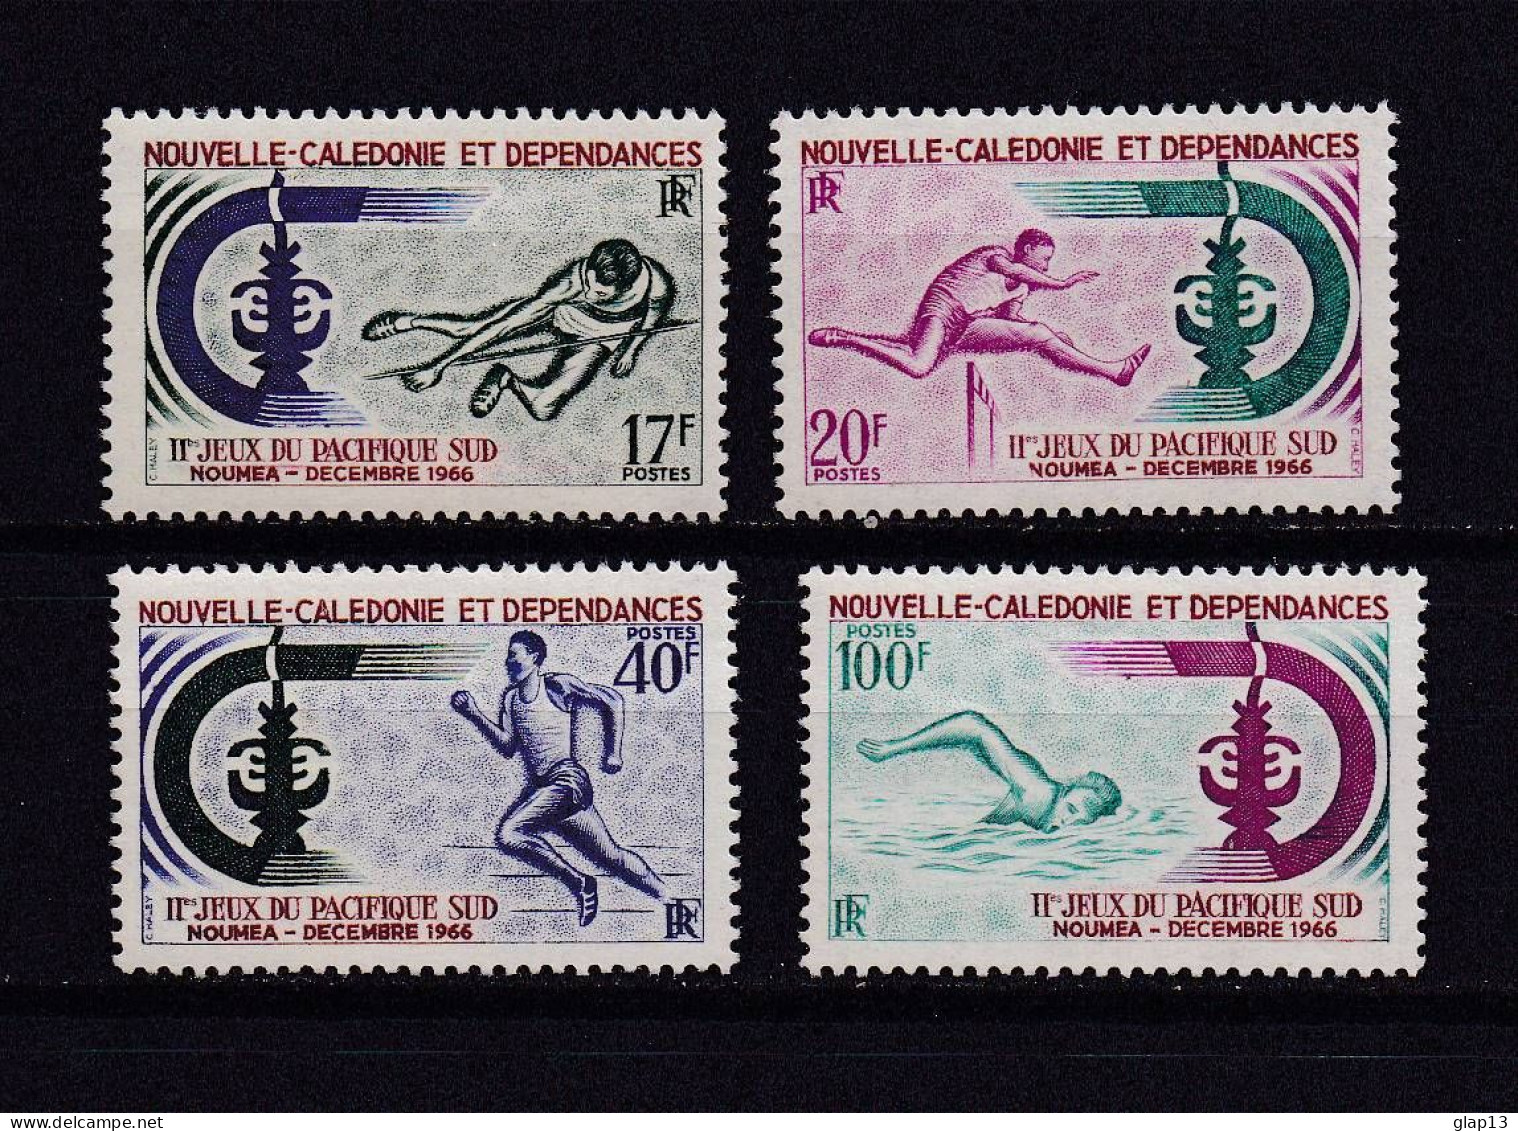 NOUVELLE-CALEDONIE 1966 TIMBRE N°332/35 NEUF AVEC CHARNIERE SPORTS - Unused Stamps